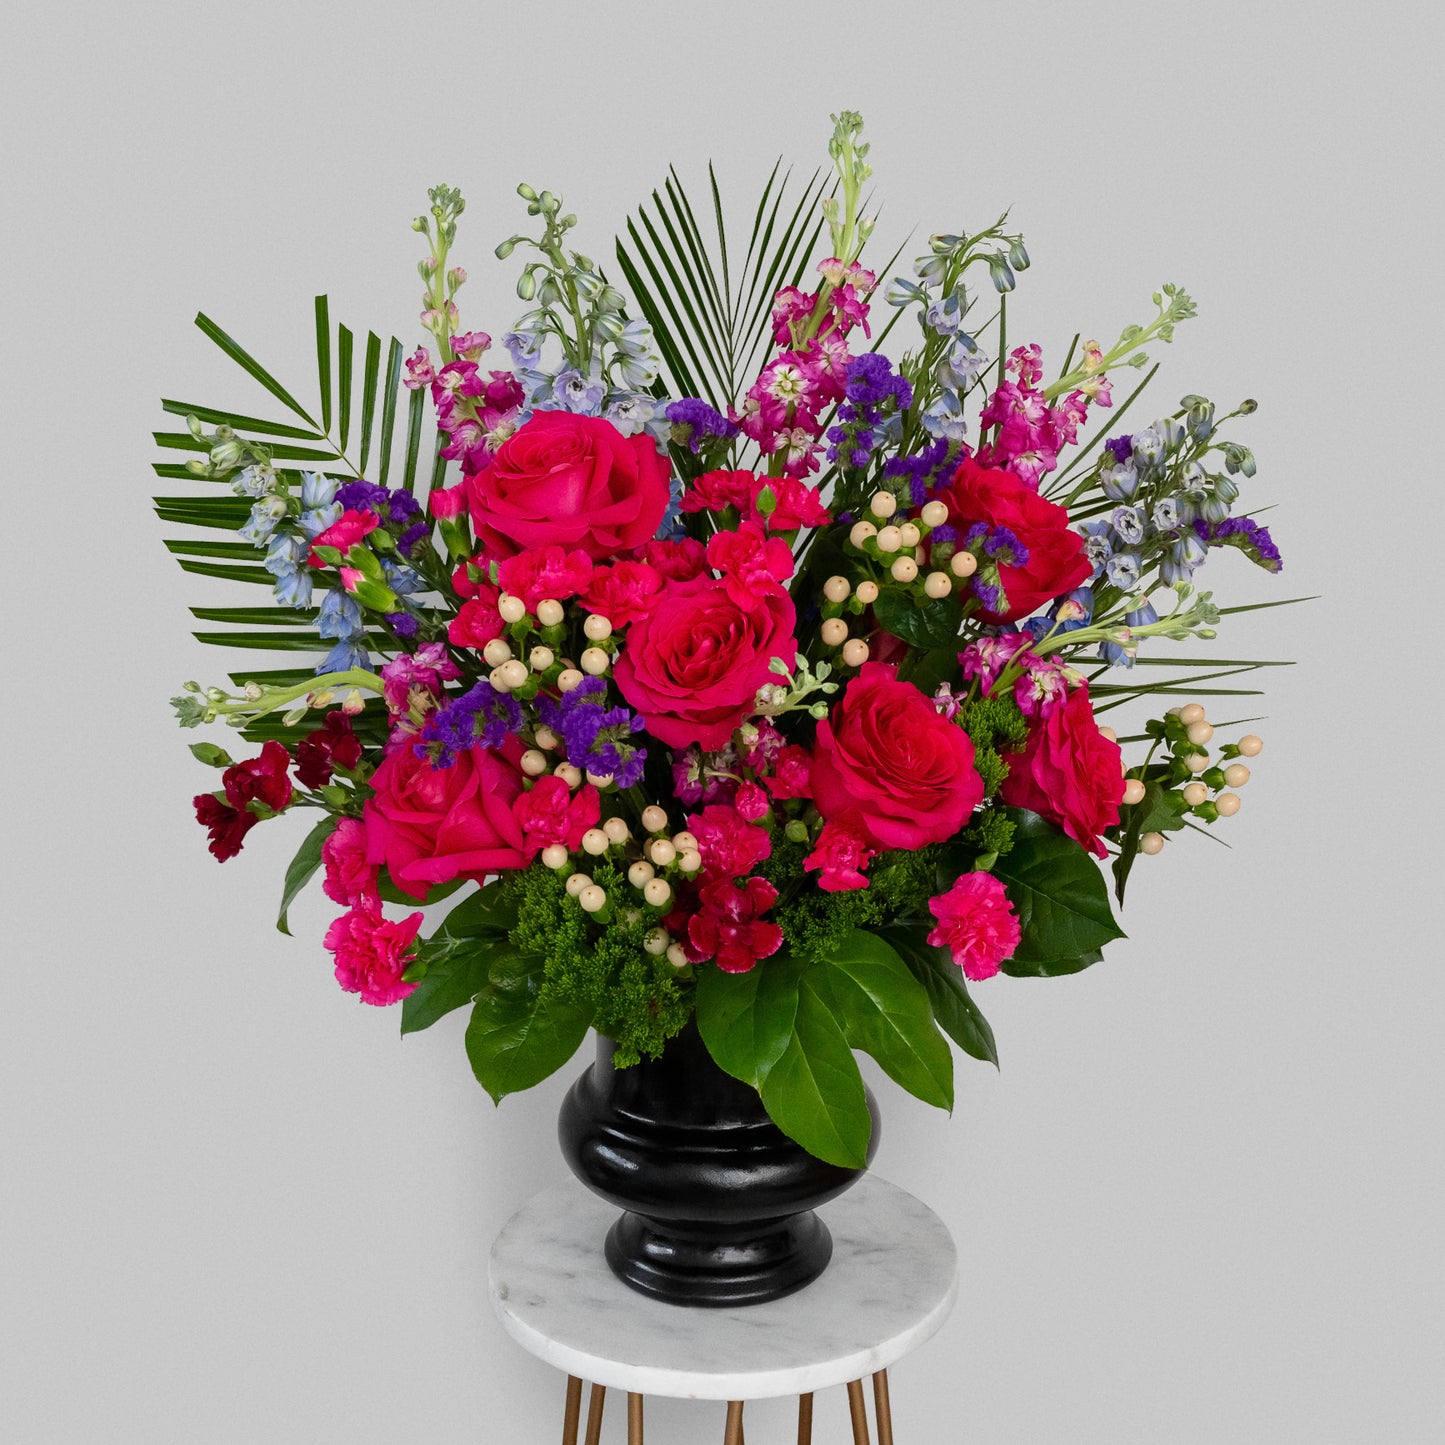 Warm Thoughts  Funeral Urn